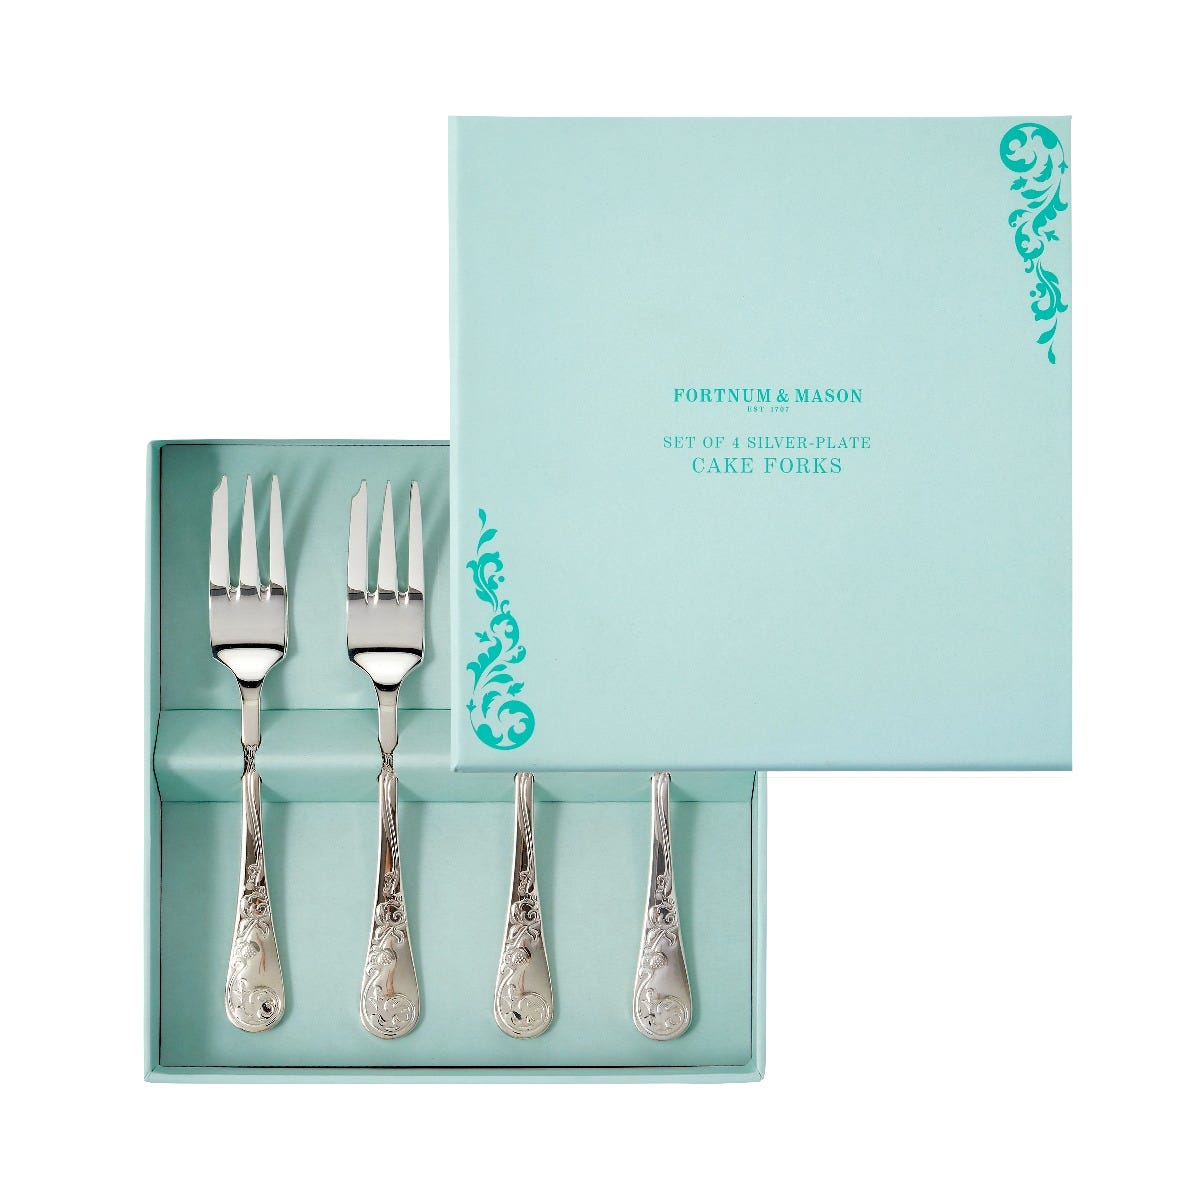 Silver-Plated Pastry Forks, Set of 4, Fortnum & Mason